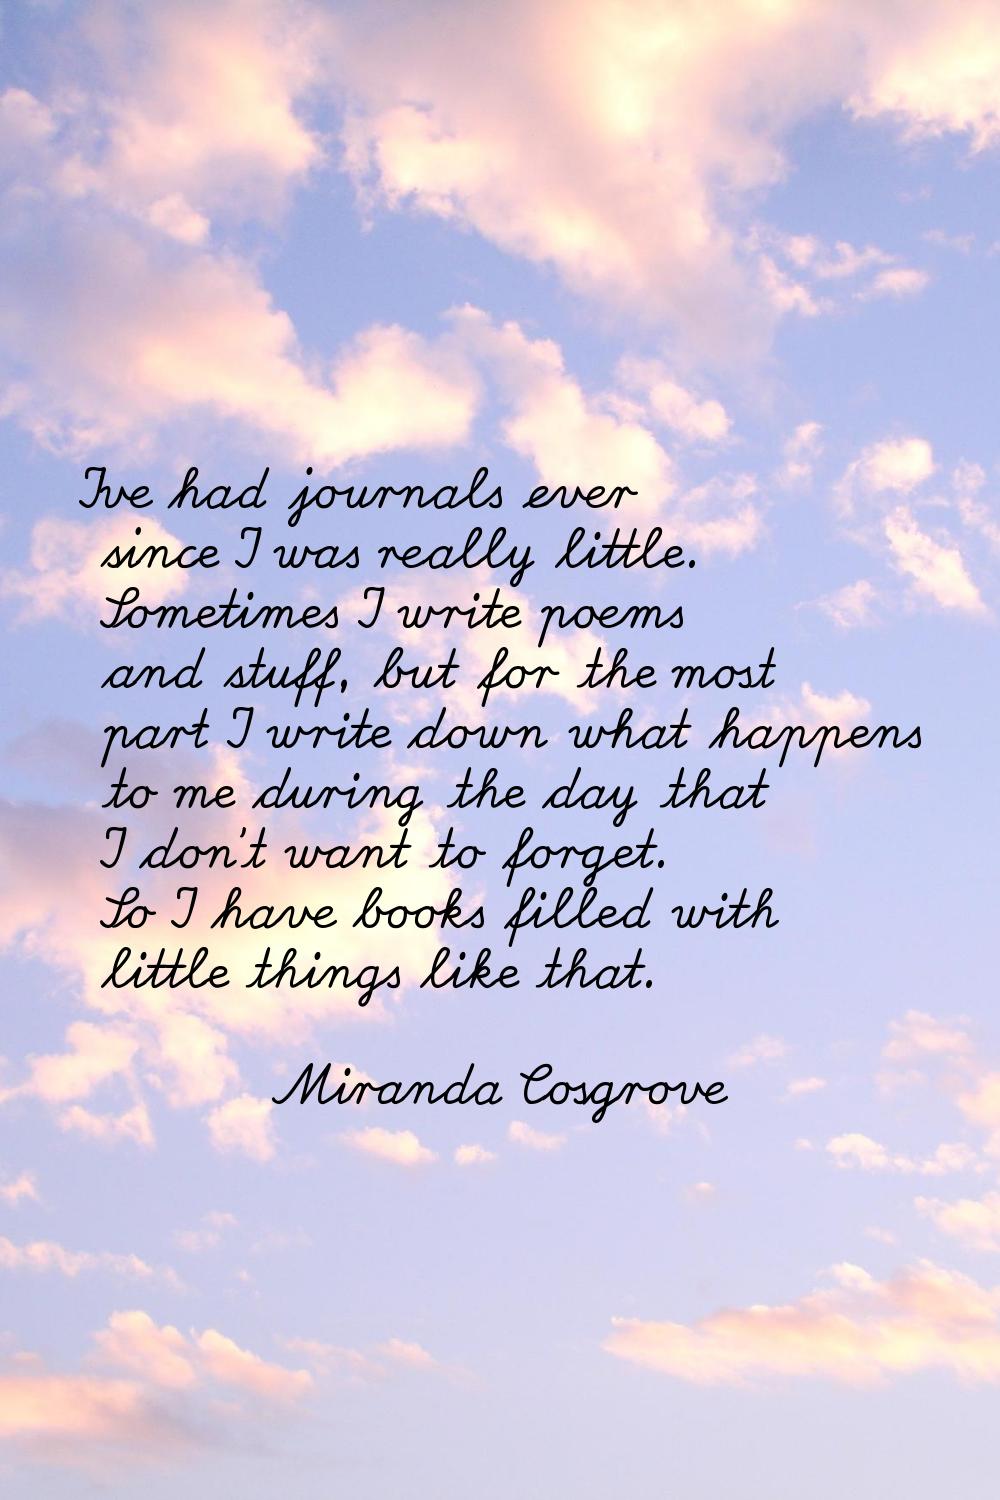 I've had journals ever since I was really little. Sometimes I write poems and stuff, but for the mo